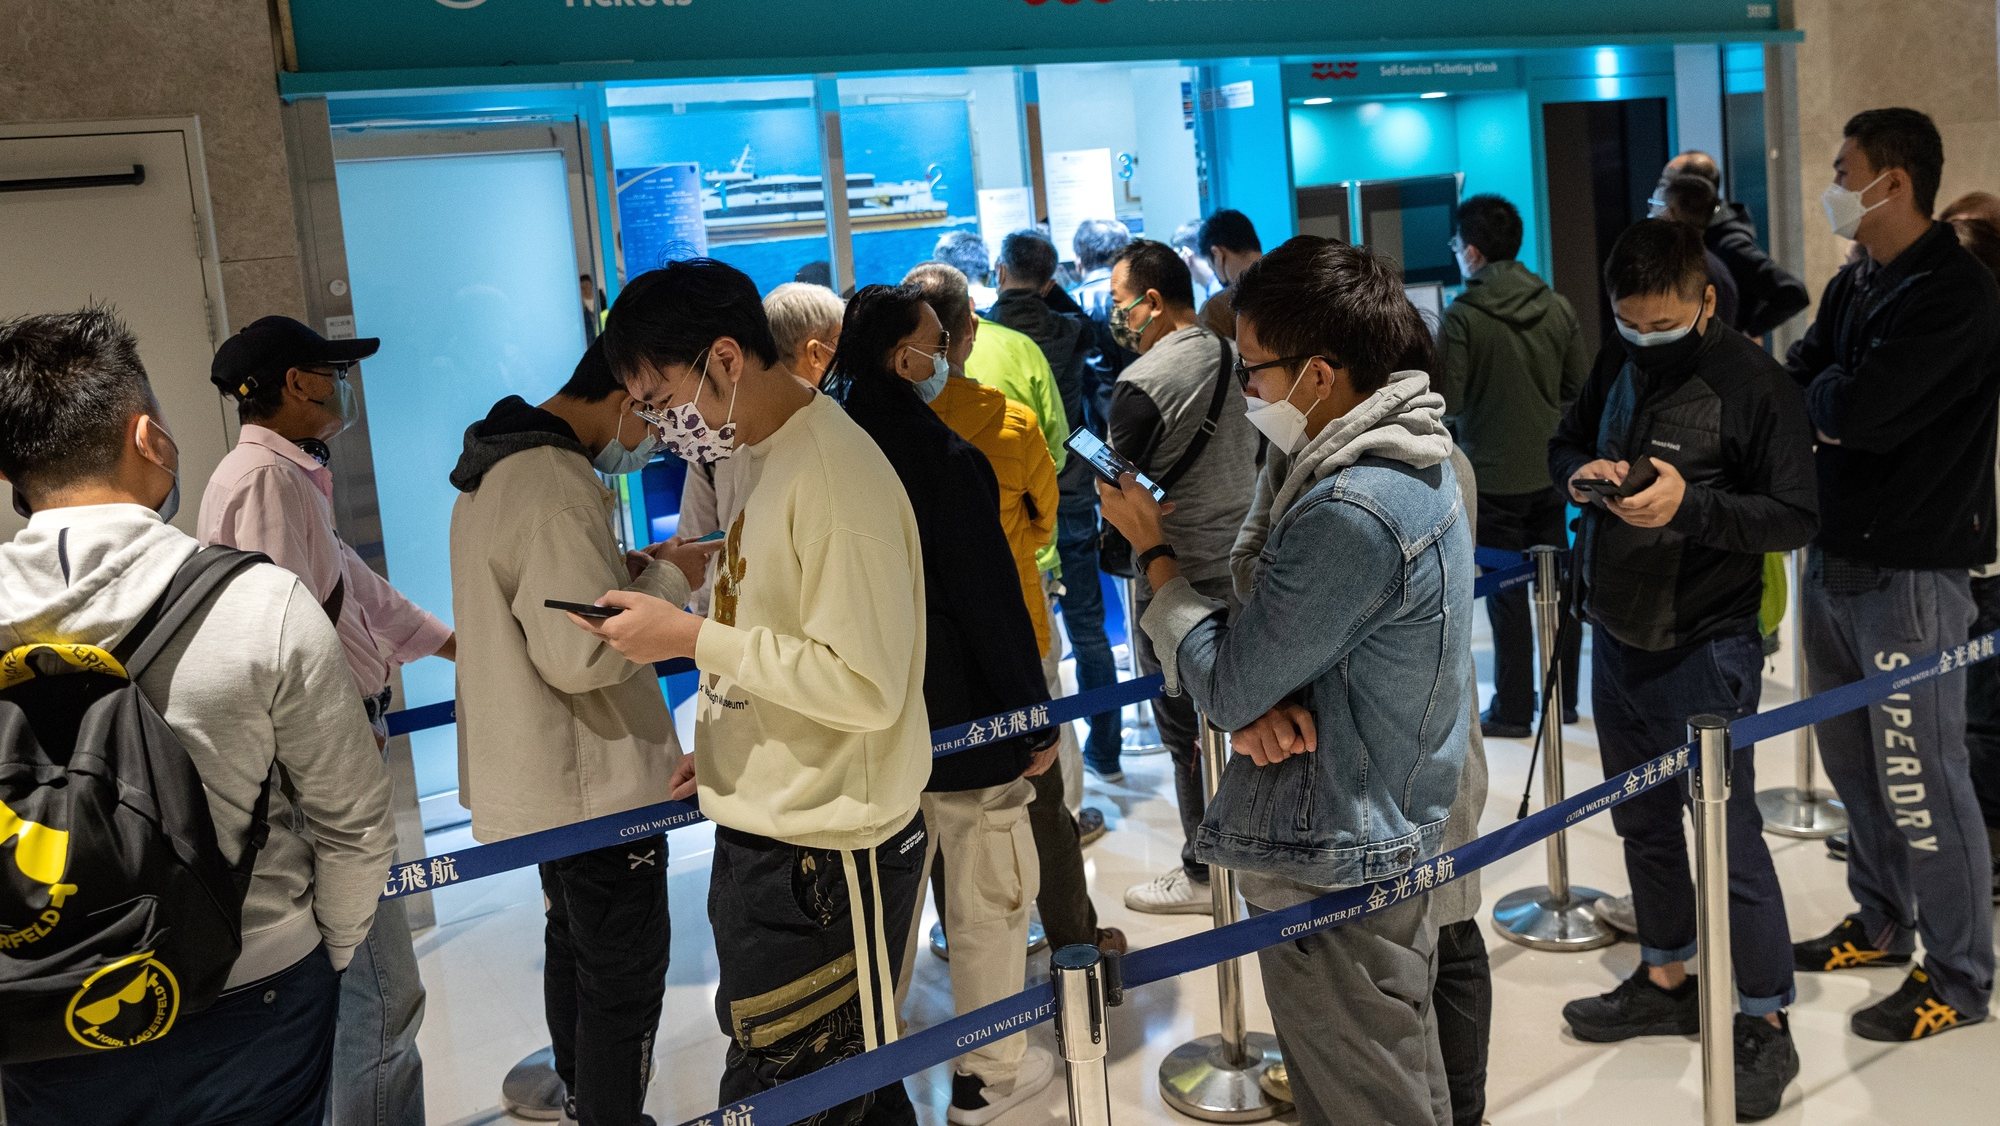 epa10391669 People line up to buy ferry tickets to  mainland China and Macau at the Hong Kong Macau Ferry Terminal in Hong Kong, China, 06 January 2023. On 08 January 2023 Hong Kong will reopen its borders with China and Macau allowing up to 60,000 Hong Kong travelers to enter mainland China and the Special Administrative Region of Macau on a daily basis, as China will scrap most of its Covid-19 travel restrictions and reopen to the world after almost three years.  EPA/JEROME FAVRE